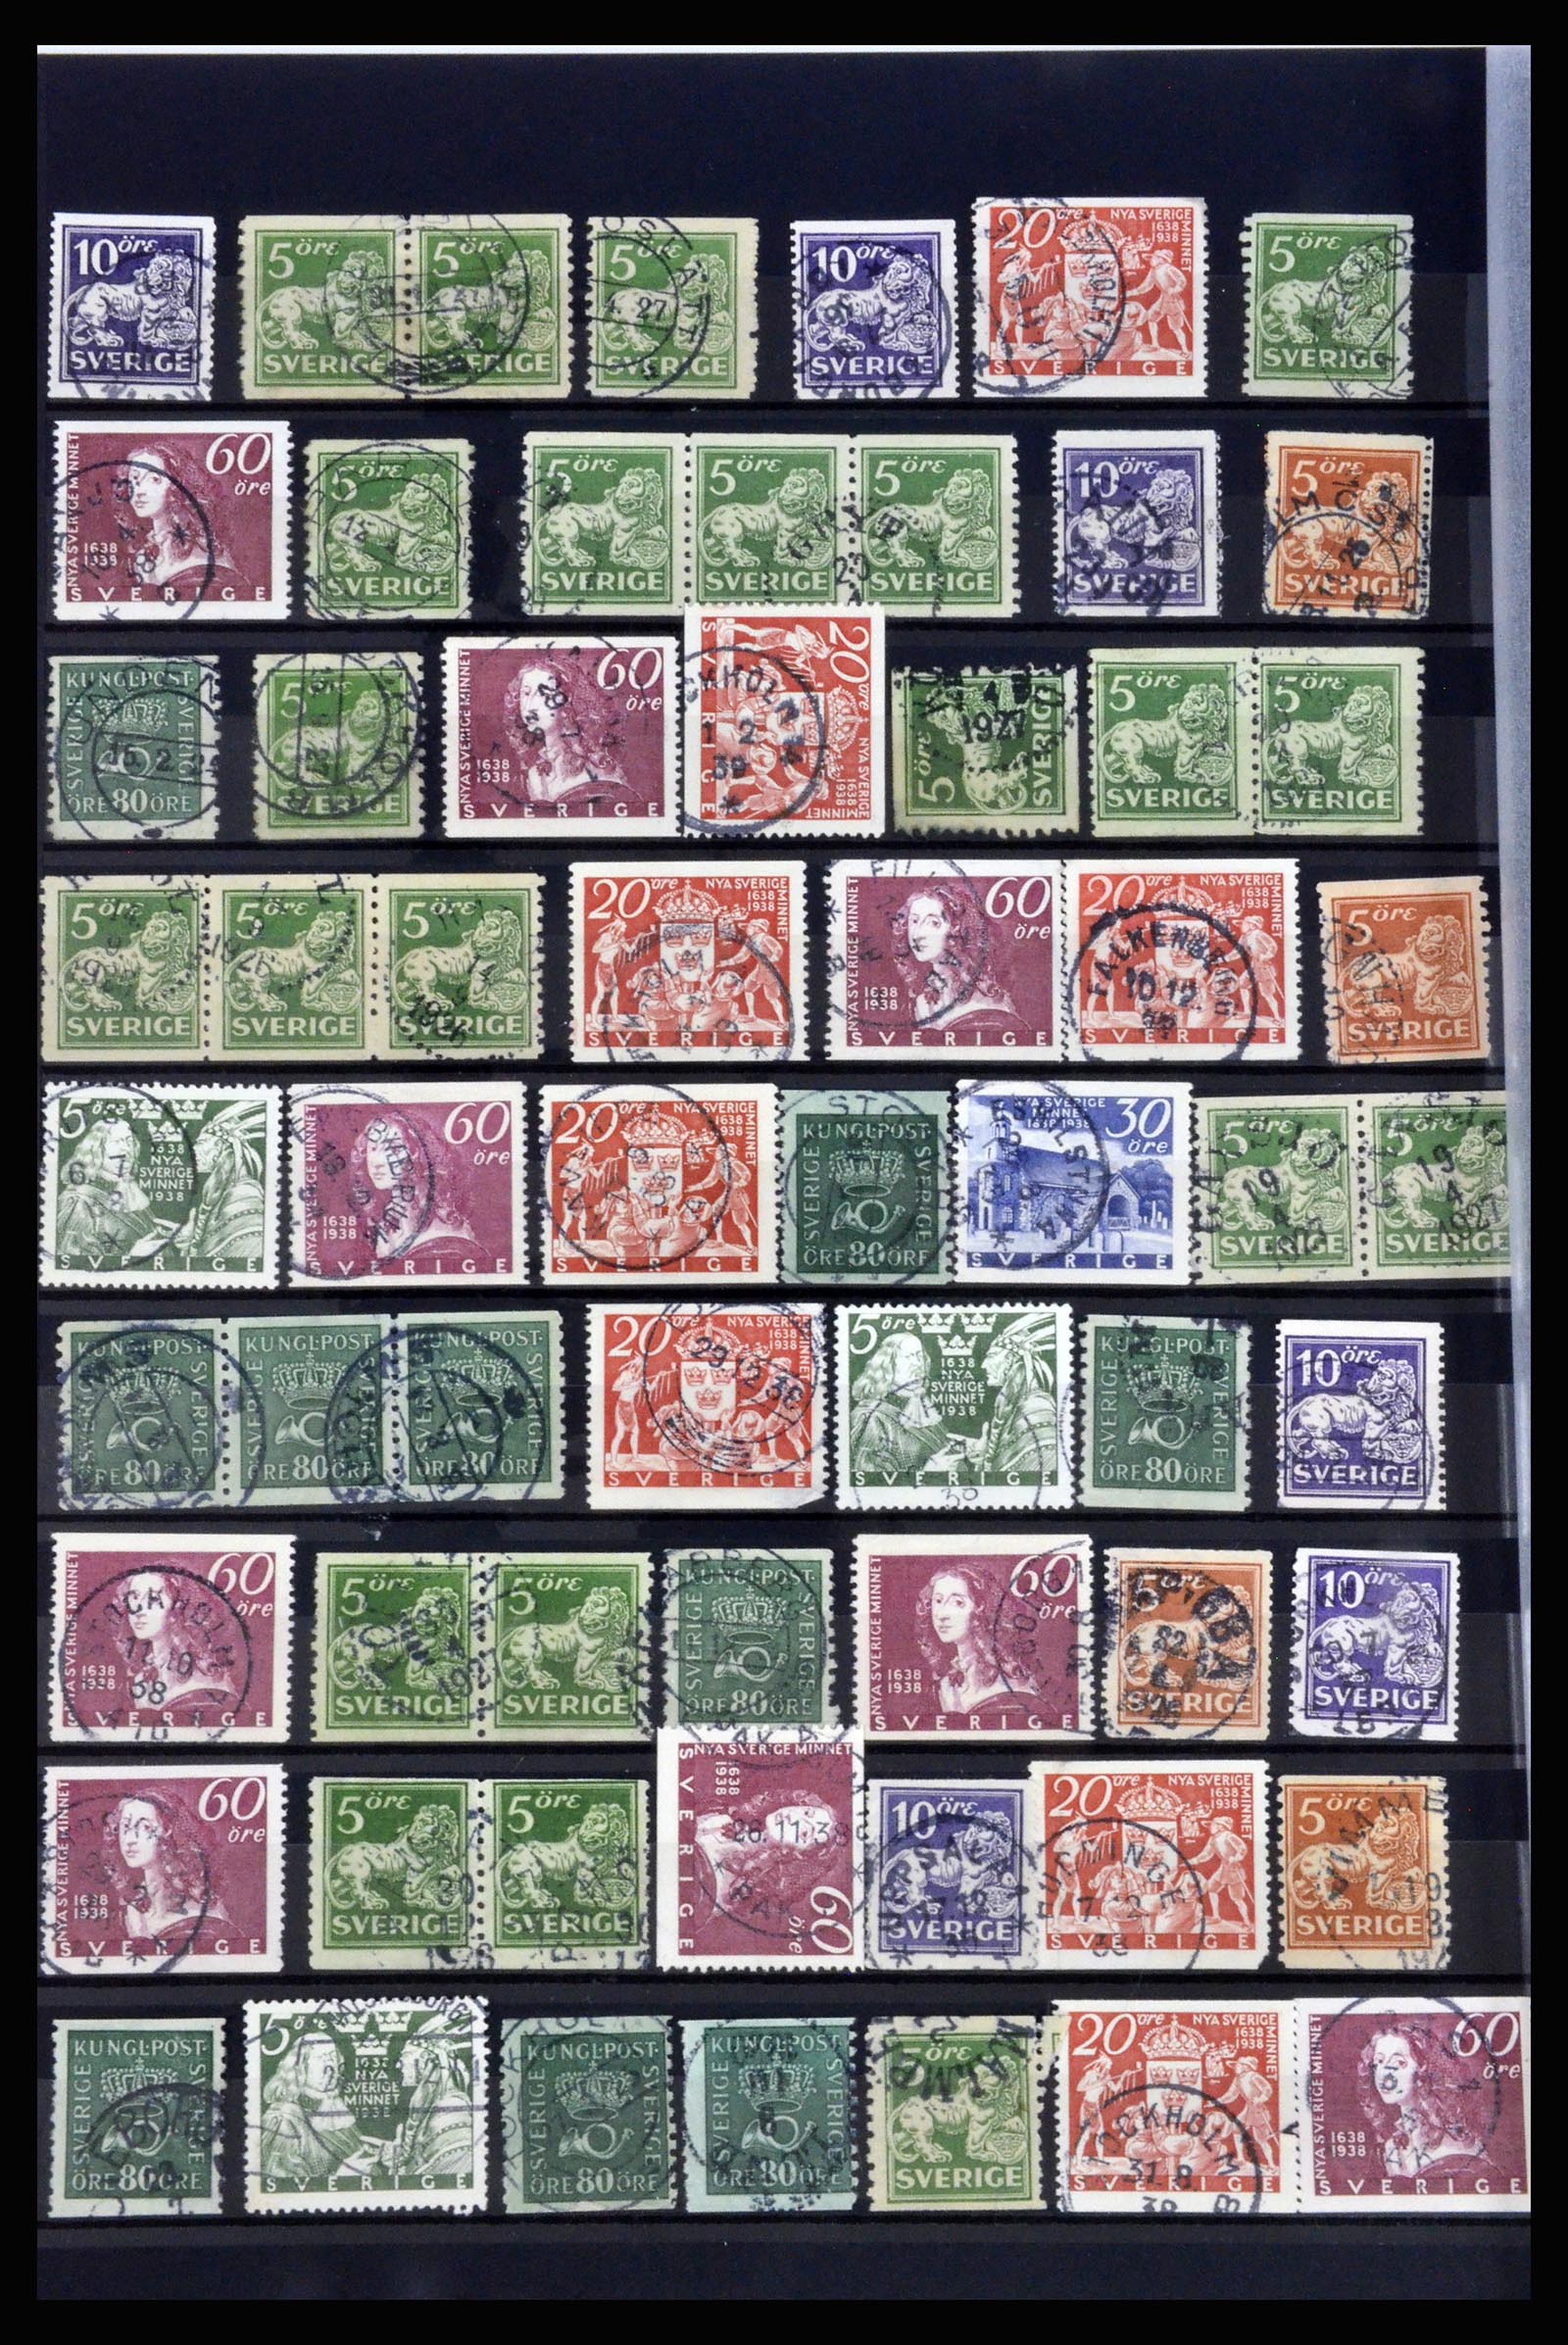 36316 042 - Stamp collection 36316 Sweden cancellations 1920-1938.